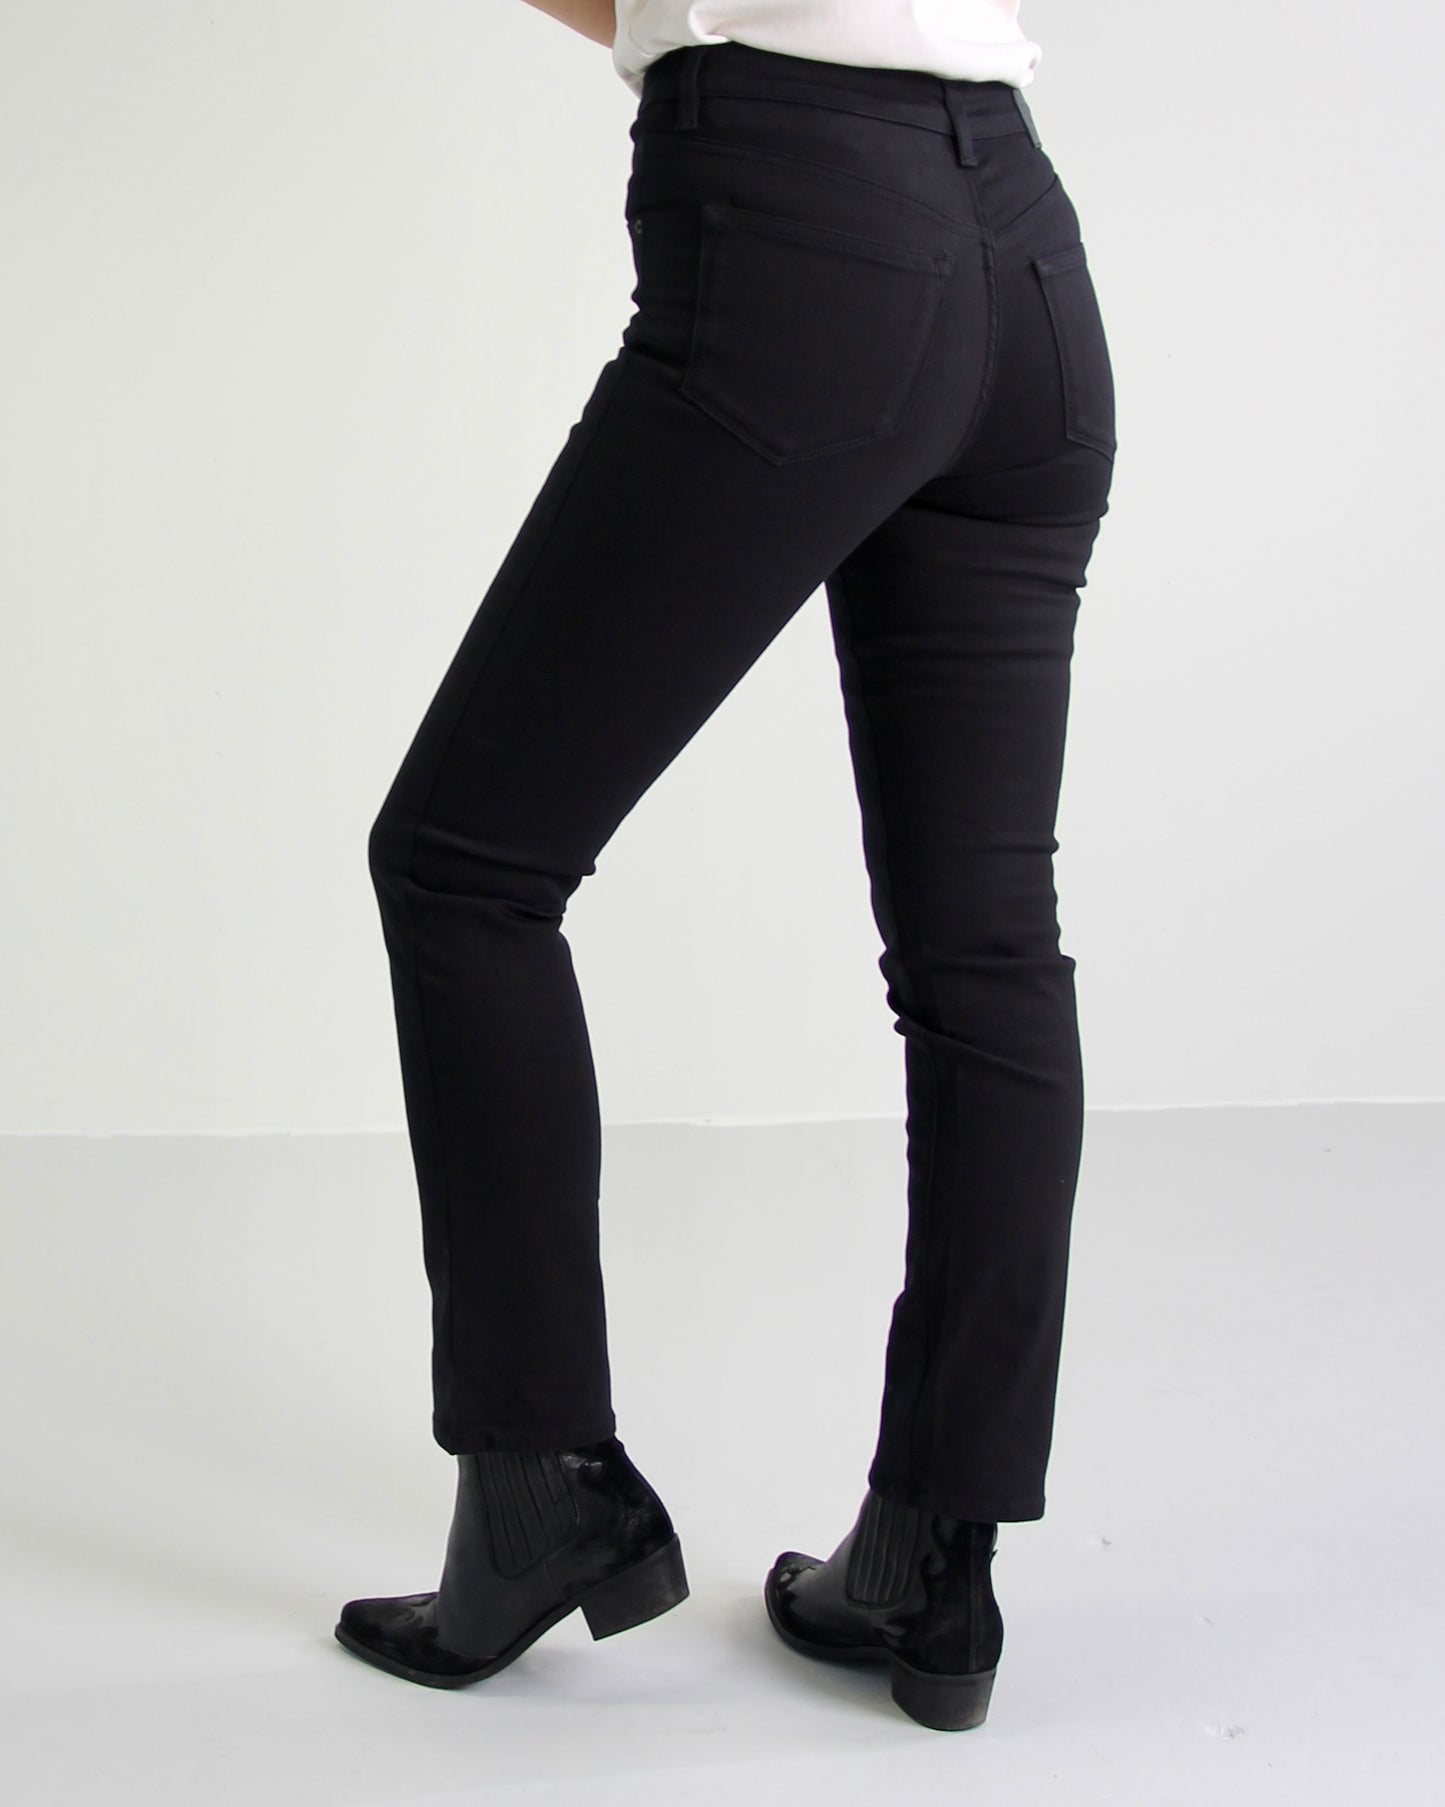 Ellery Black Jeans - Dame - Tailored  - High waist - Stretchy